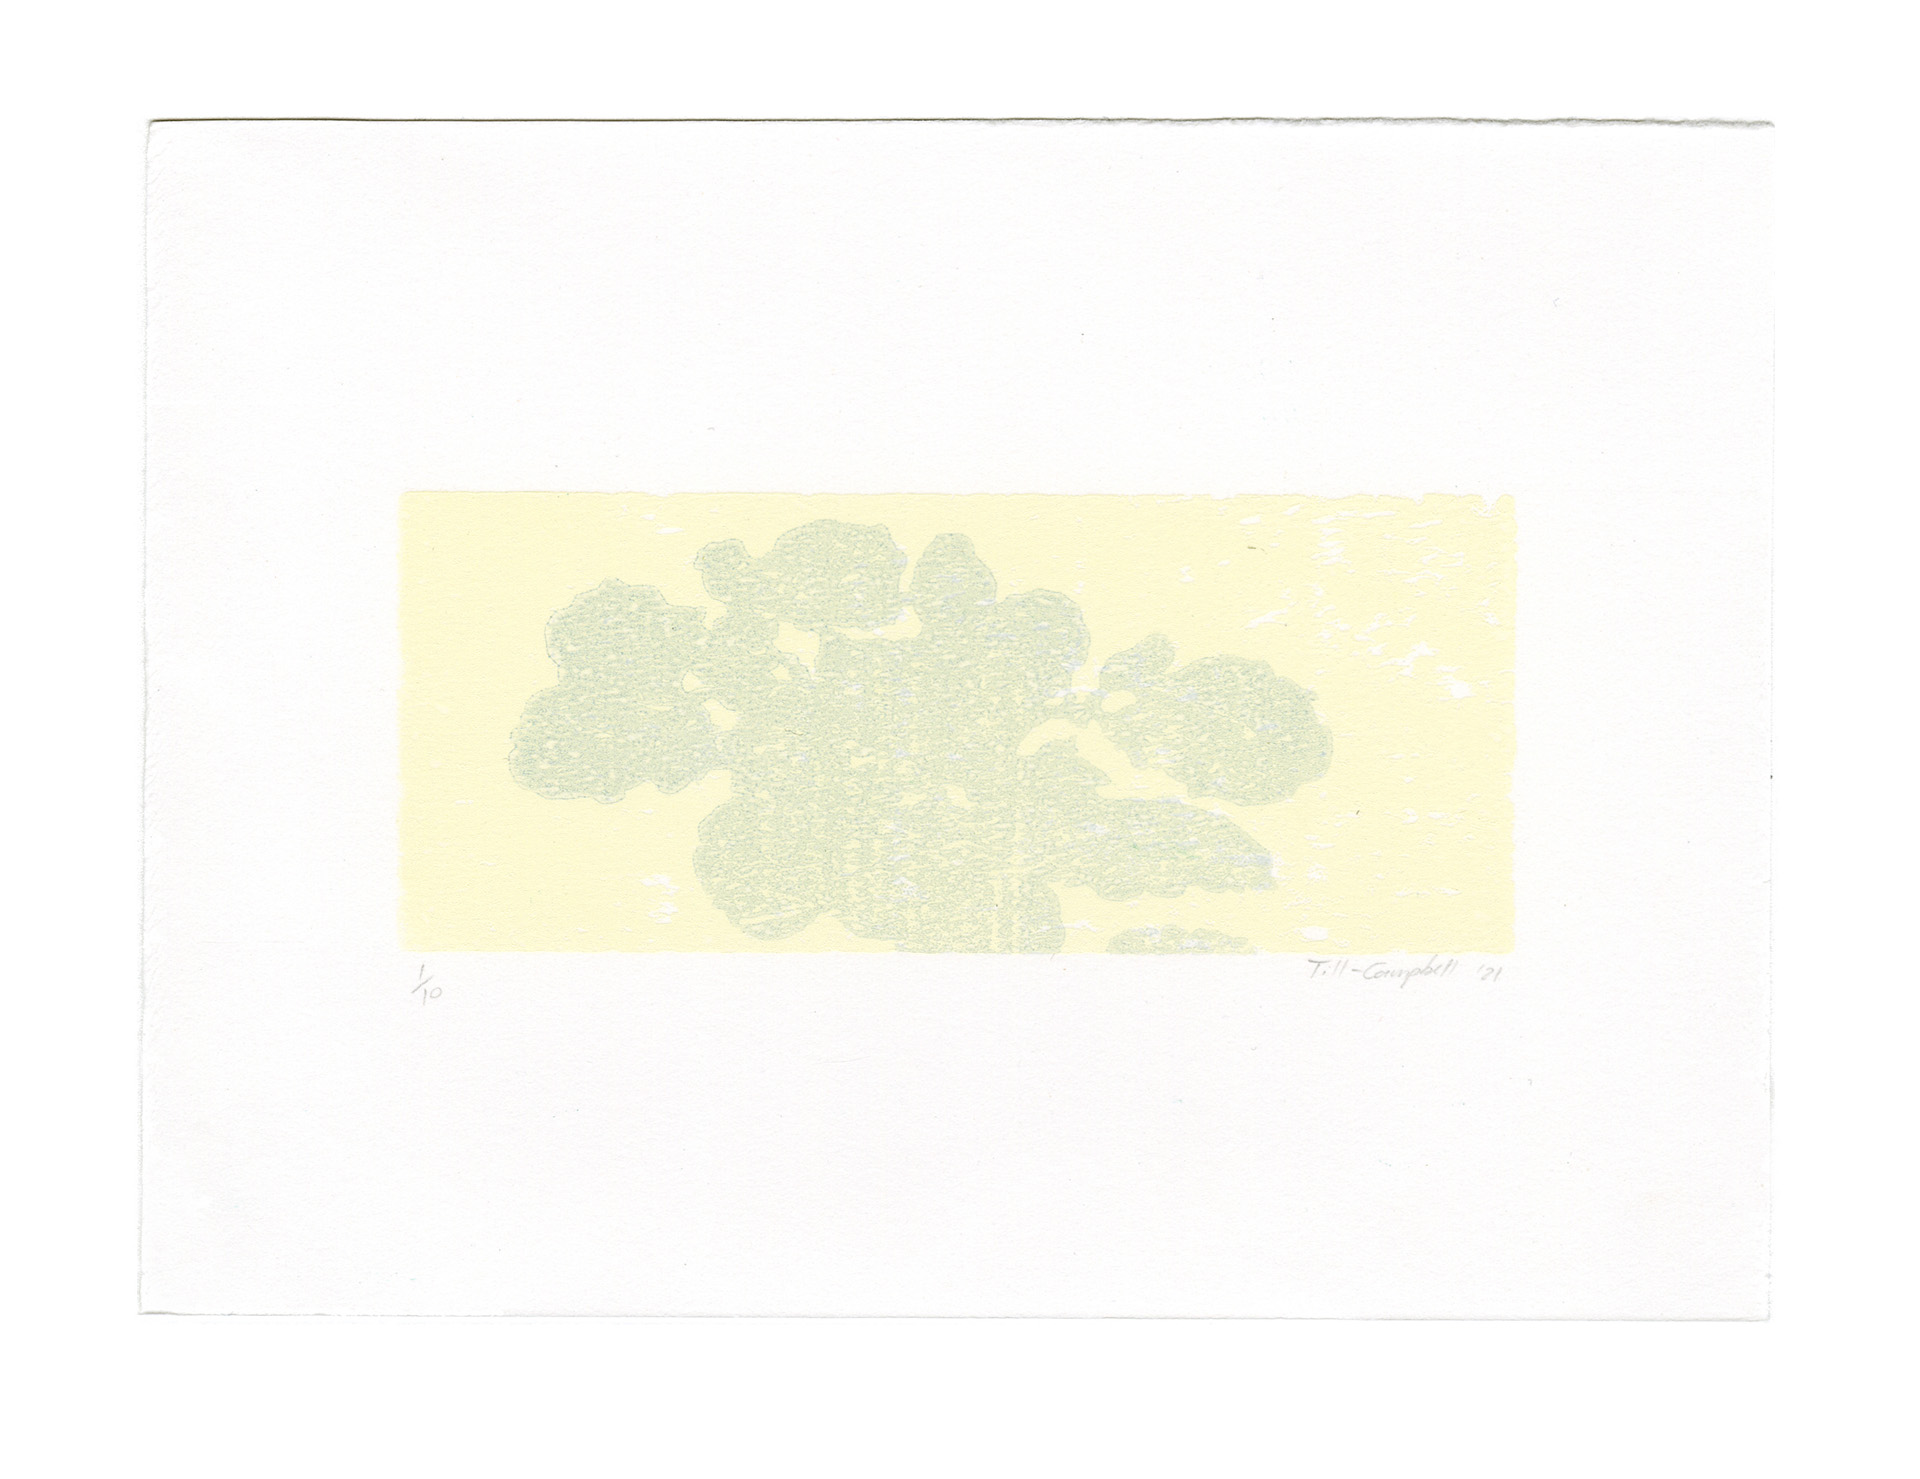 Sheldon Till-Campbell, Forest Park, IL, USA. “Untitled Color Shape,” relief print.